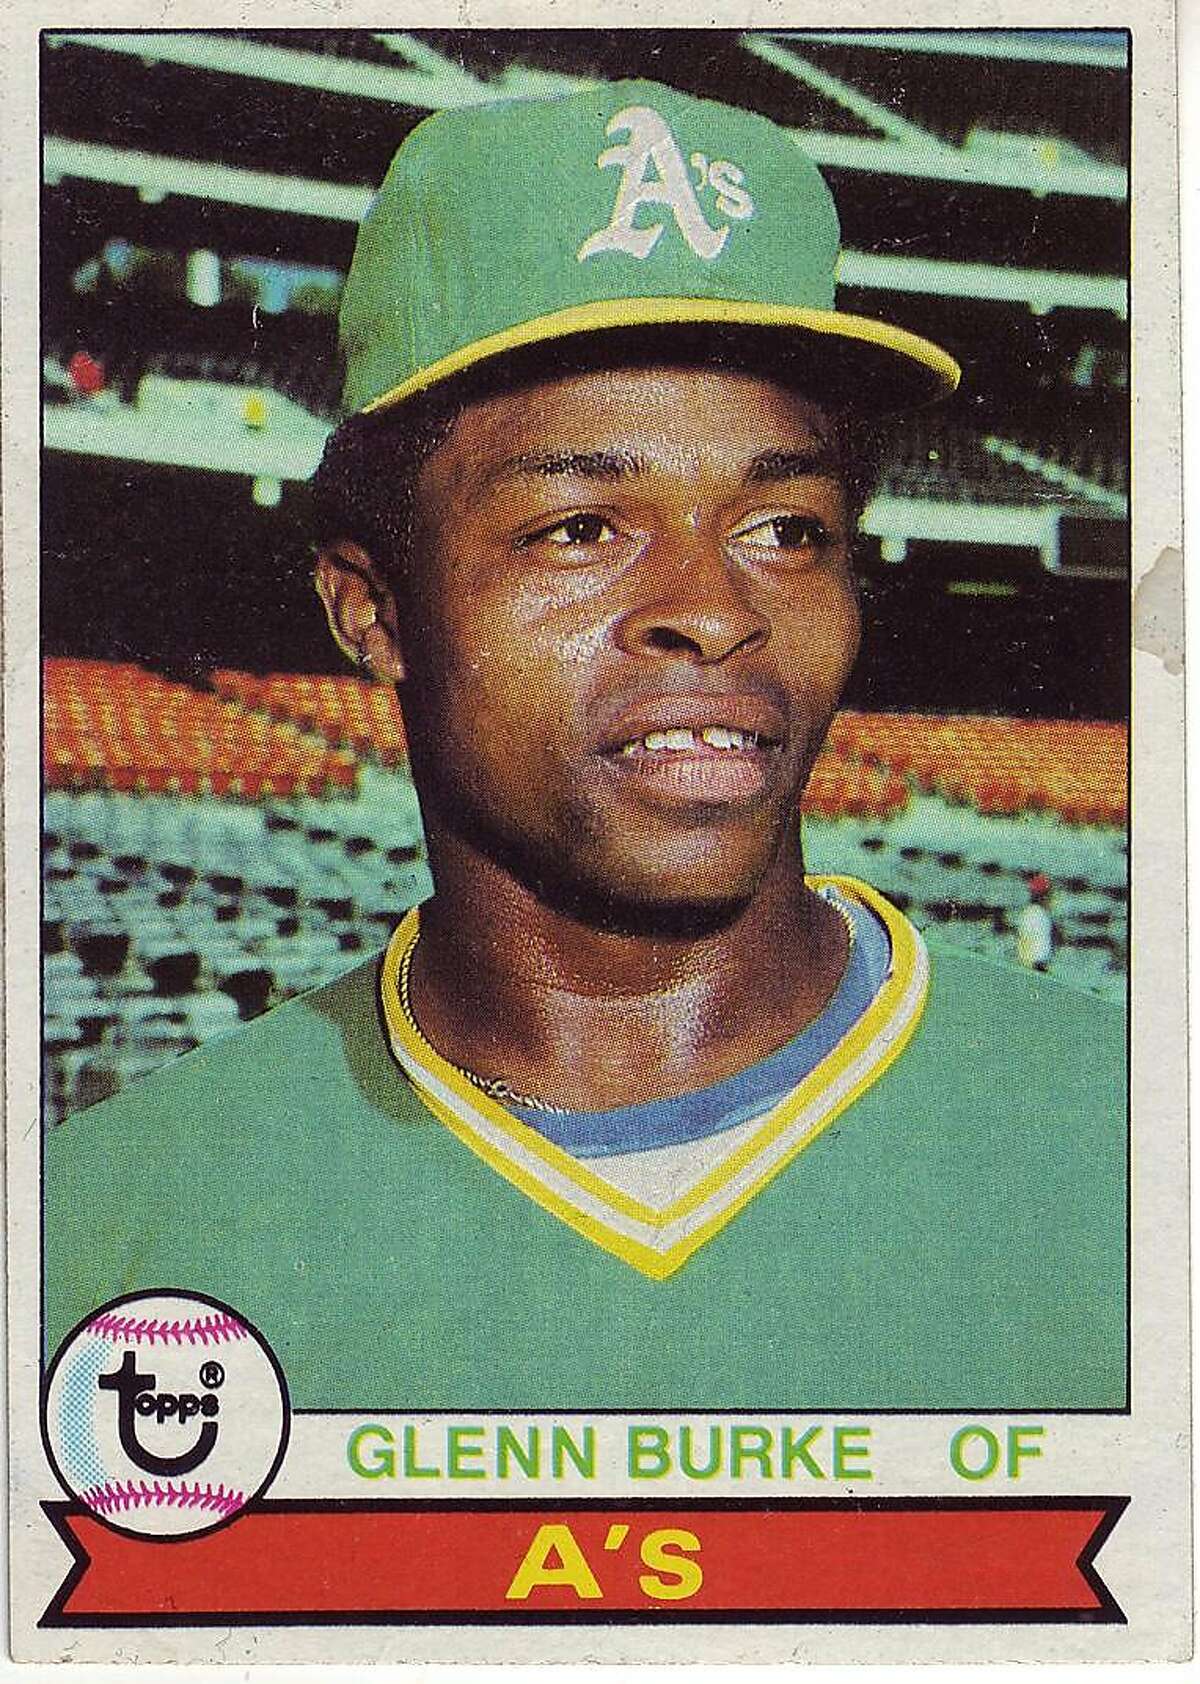 Glenn Burke played for the Los Angeles Dodgers and Oakland A's, and was also a star in the first Gay Games.